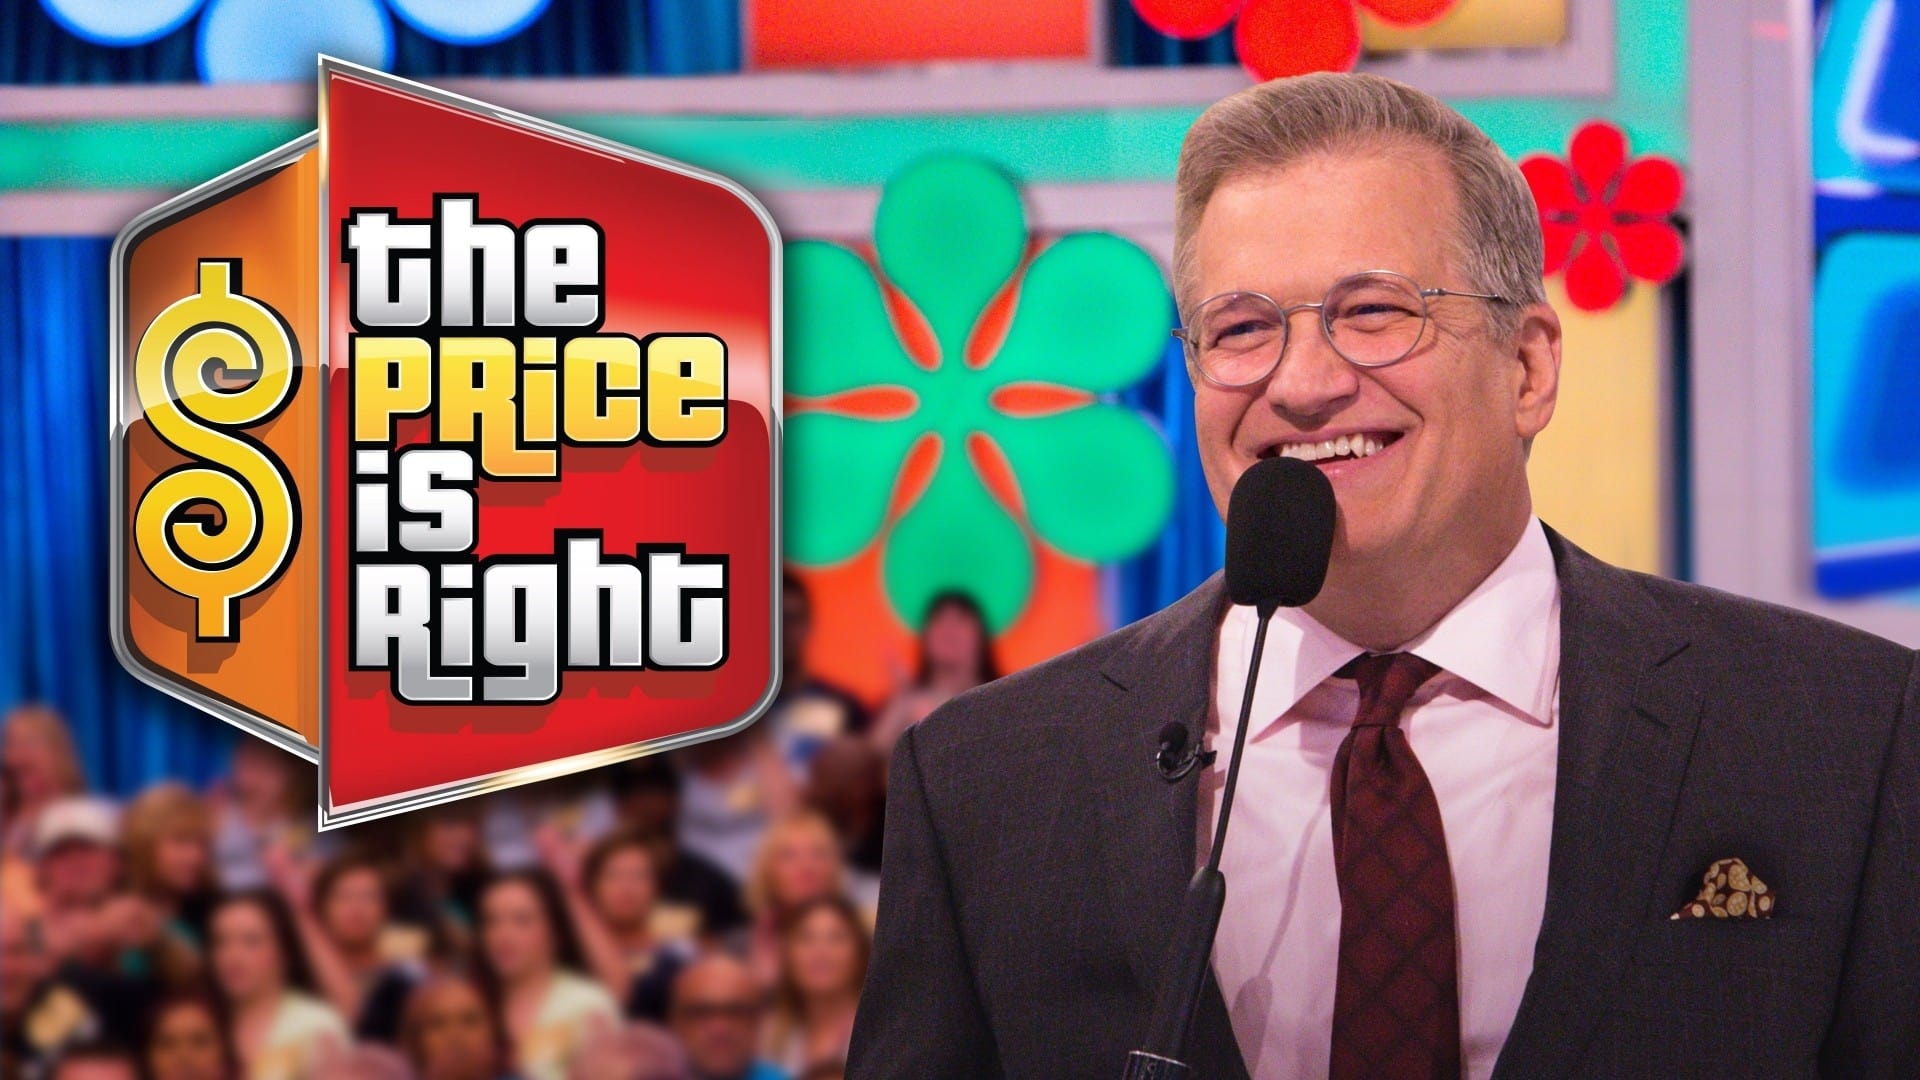 The Price Is Right - Season 6 Episode 24 : The Price Is Right Season 6 Episode 24